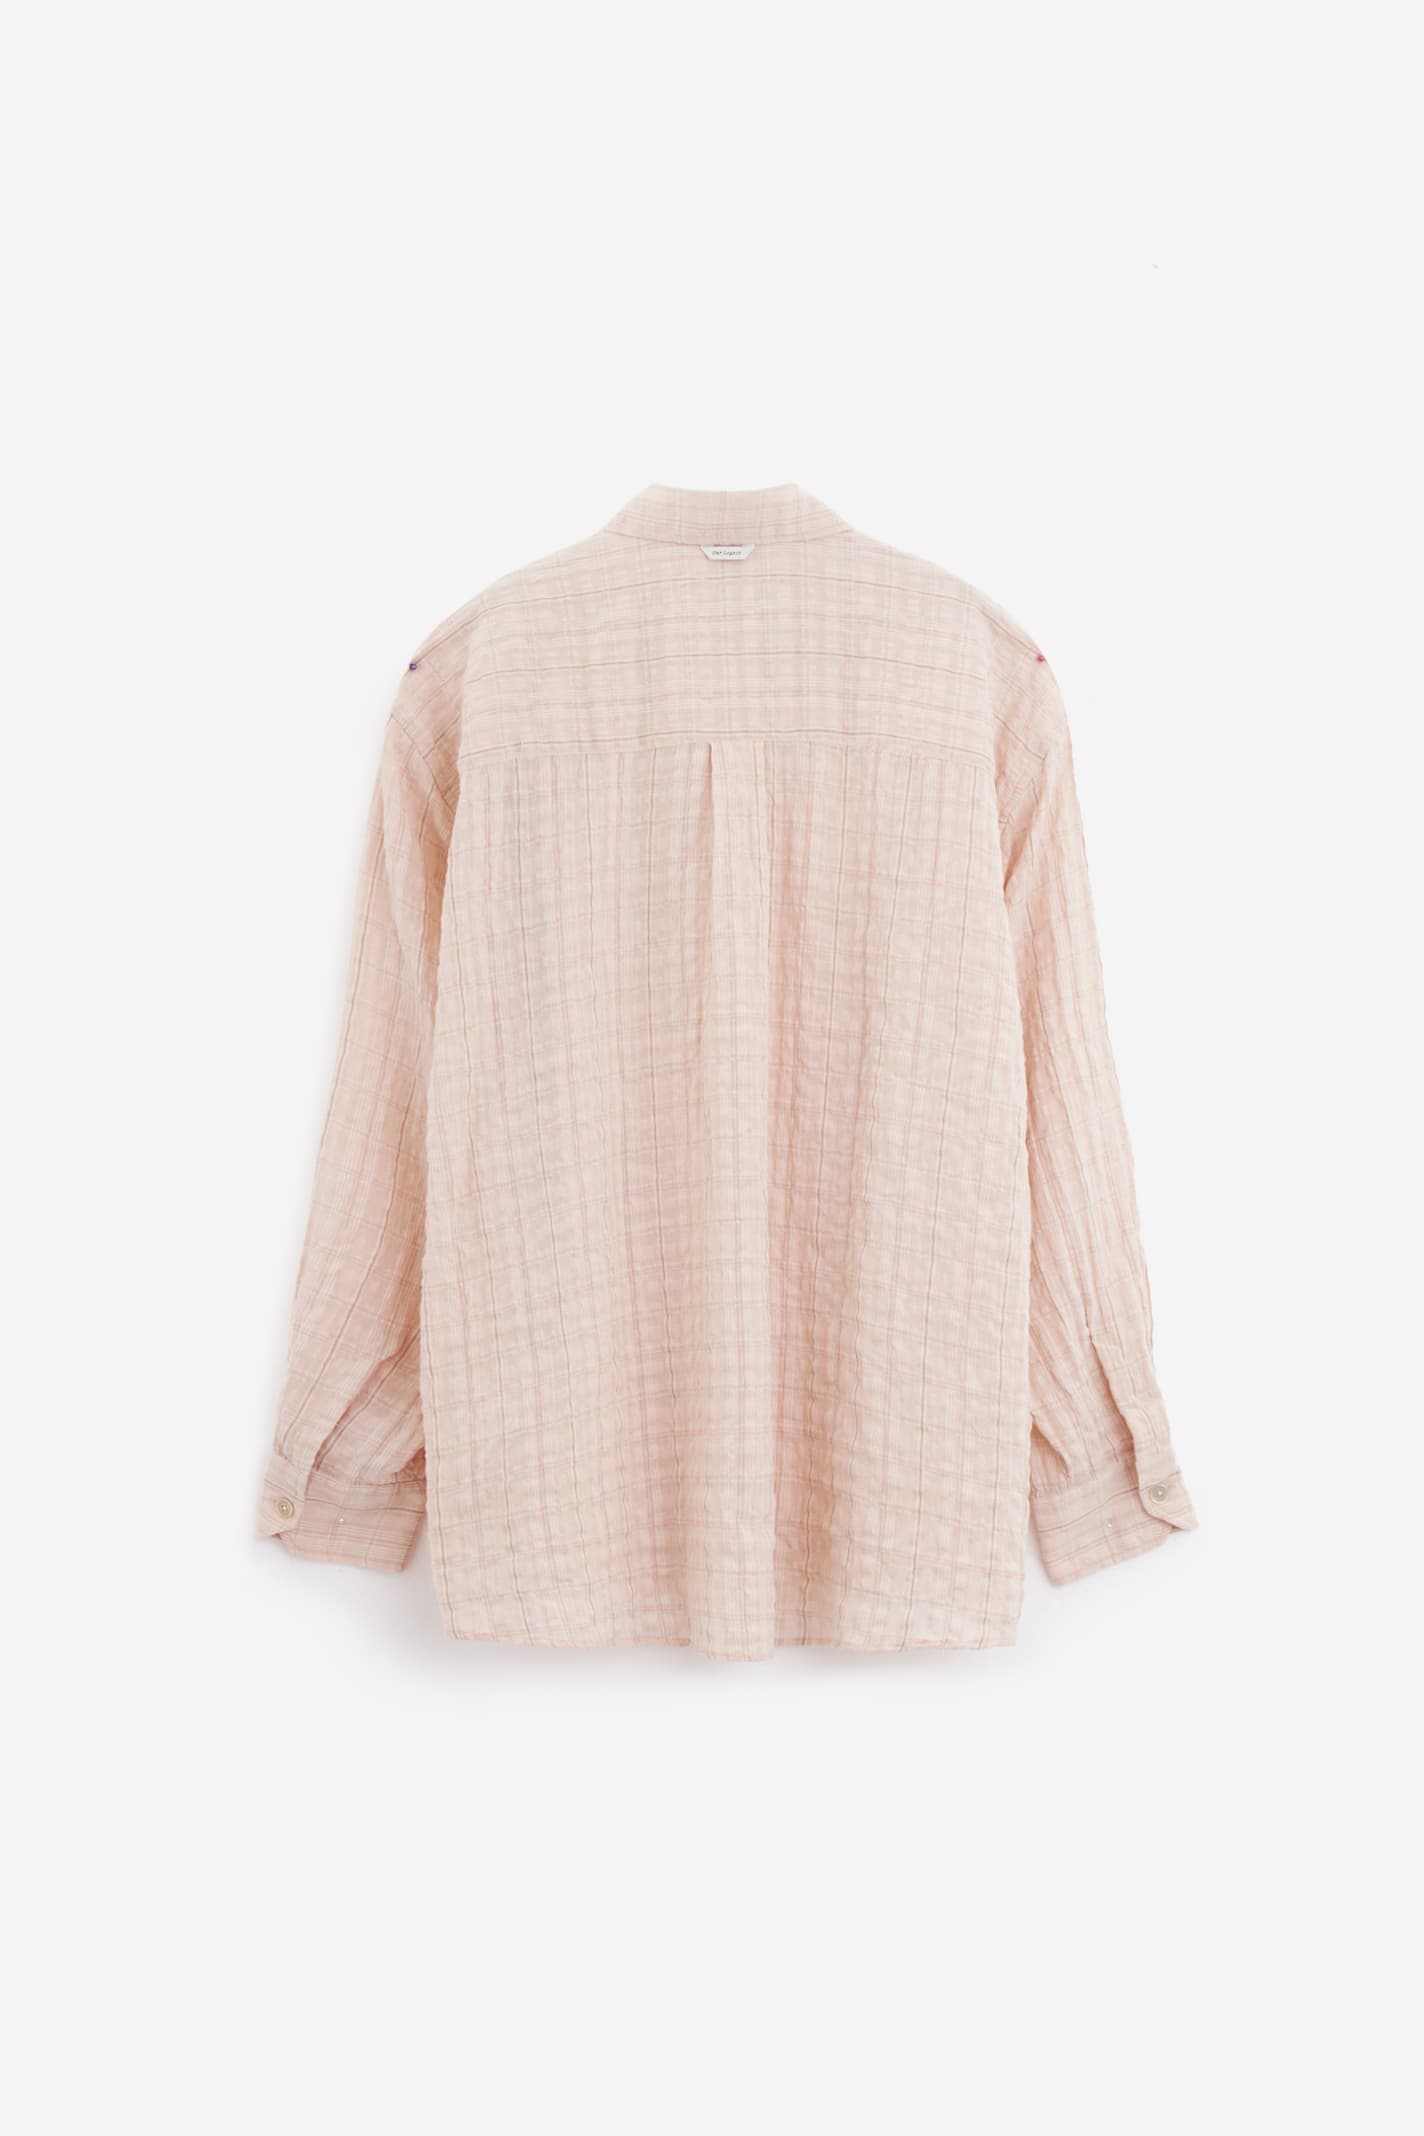 Shop Our Legacy Borrowed Shirt In Rose-pink